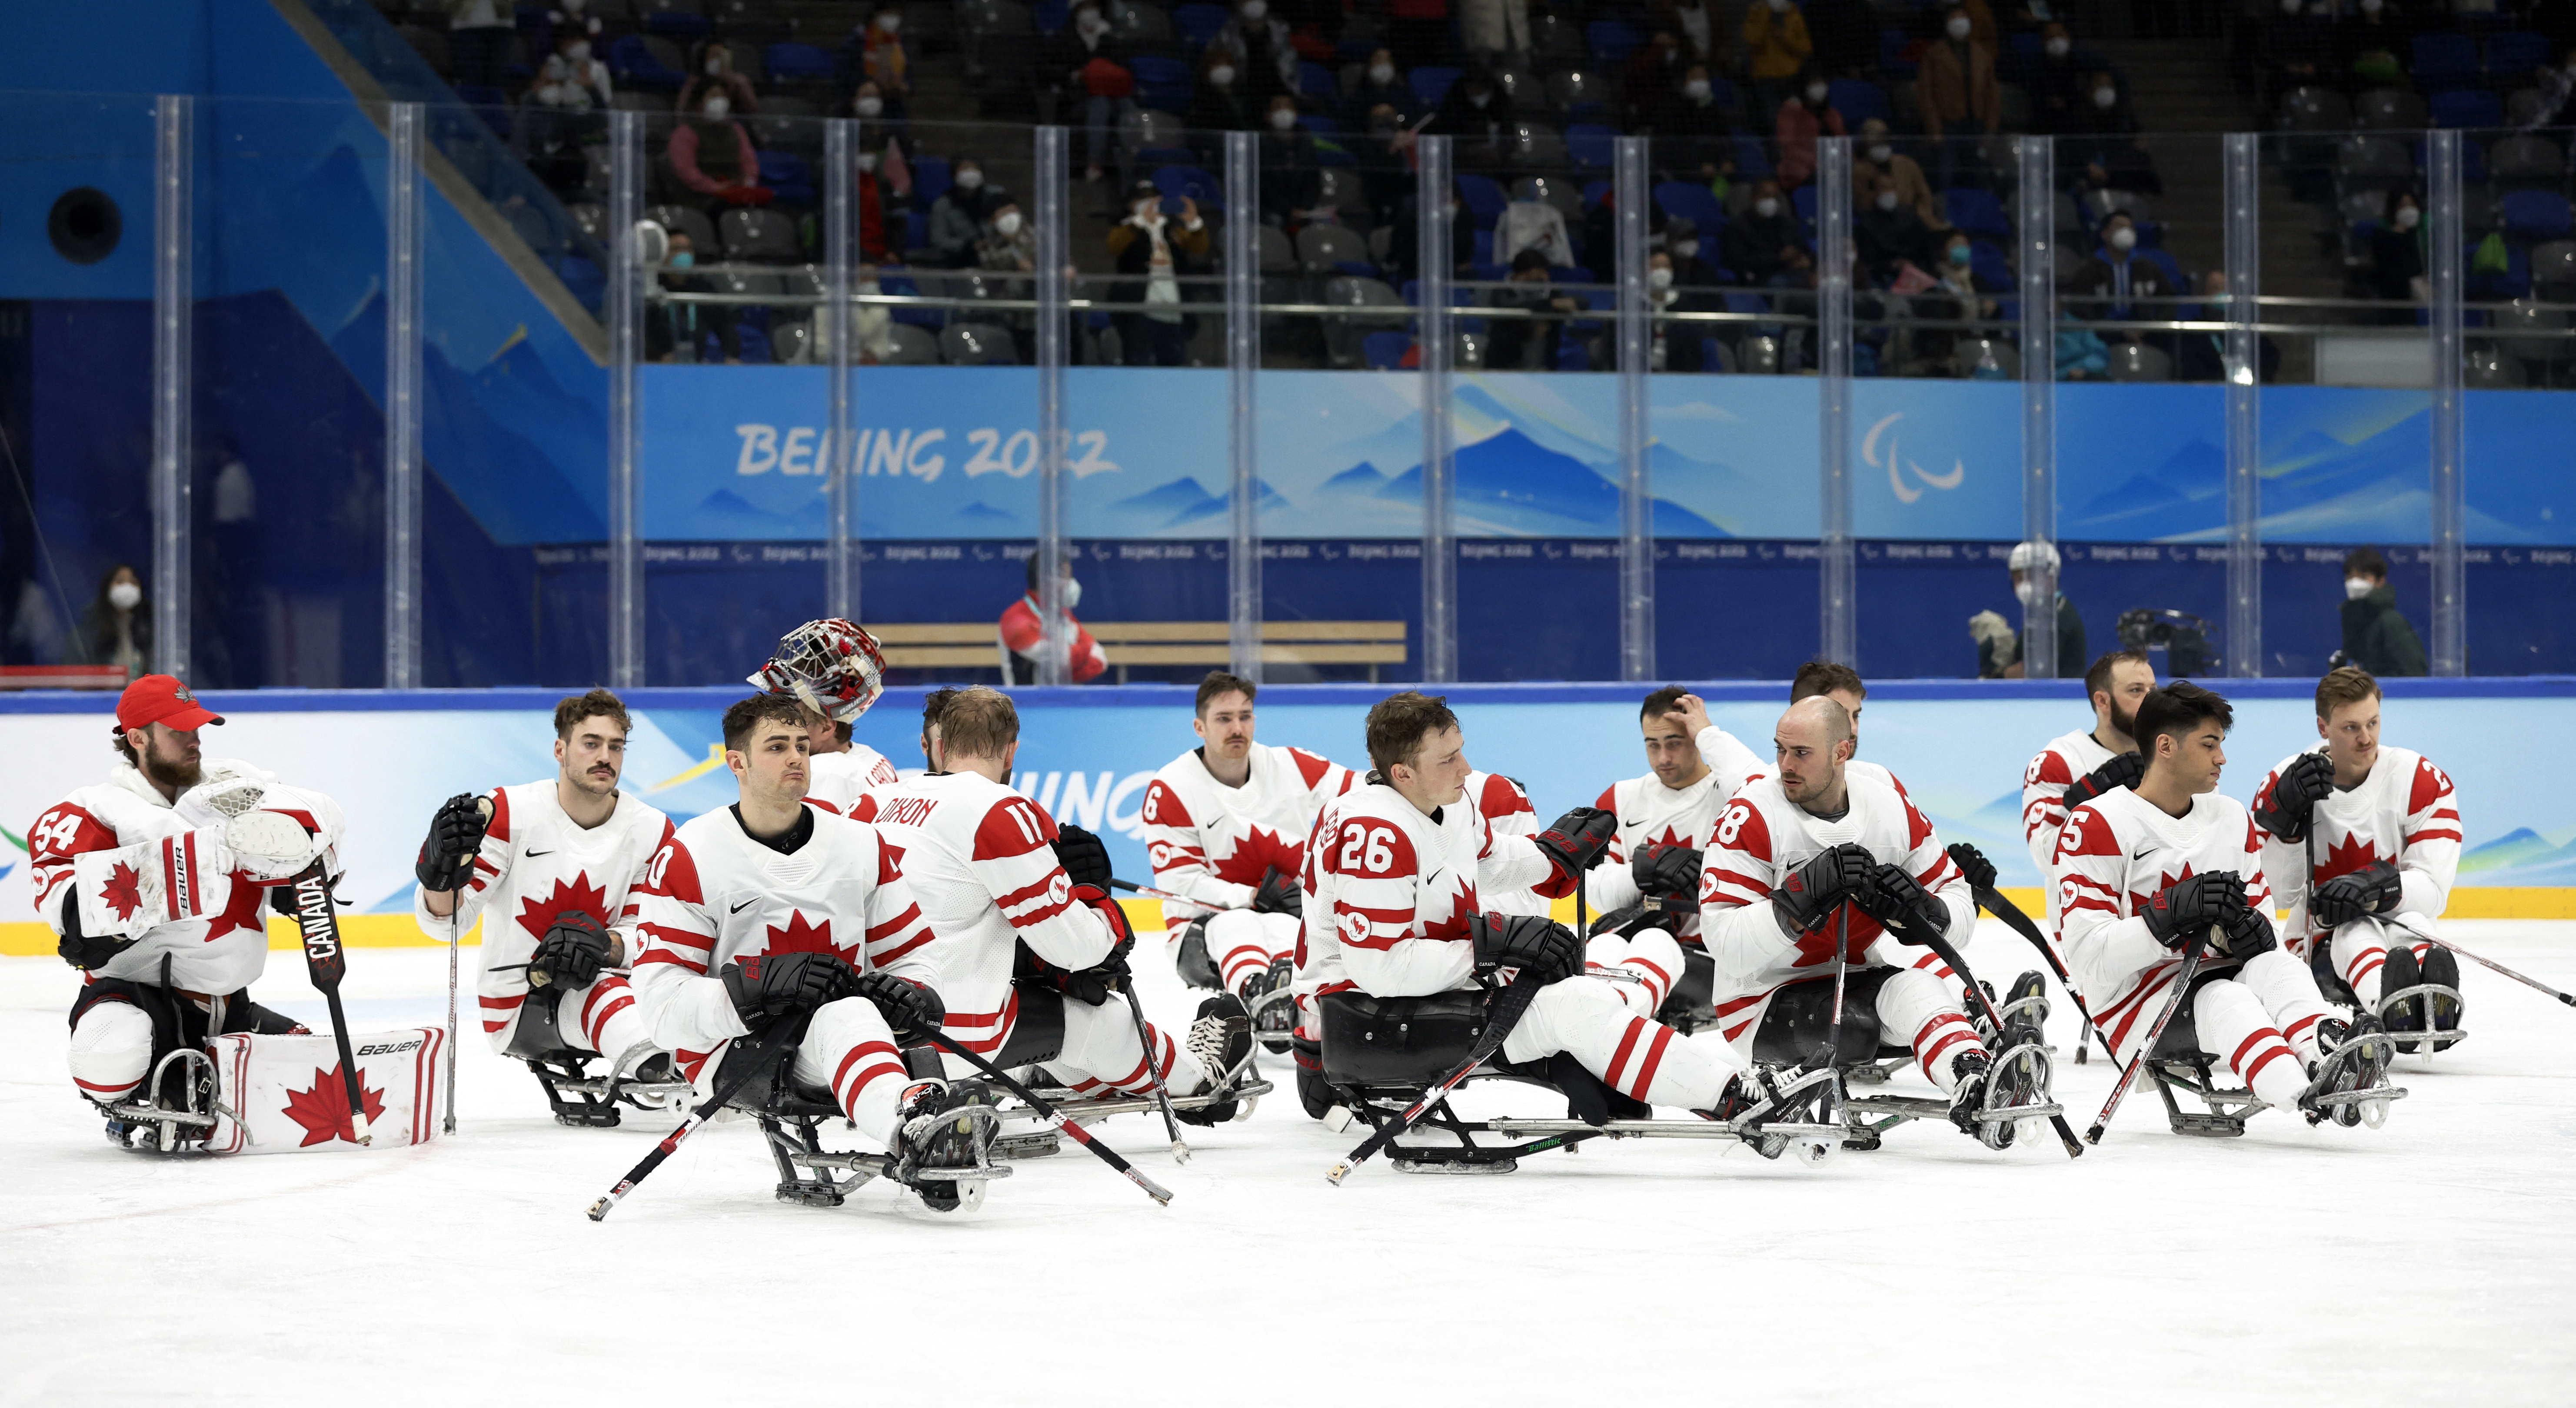 Beijing 2022 Winter Paralympic Games - Para Ice Hockey - Gold Medal Match - United States v Canada - National Indoor Stadium, Beijing, China - March 13, 2022. Silver medallists team Canada players look dejected during the medal ceremony. REUTERS/Peter Cziborra